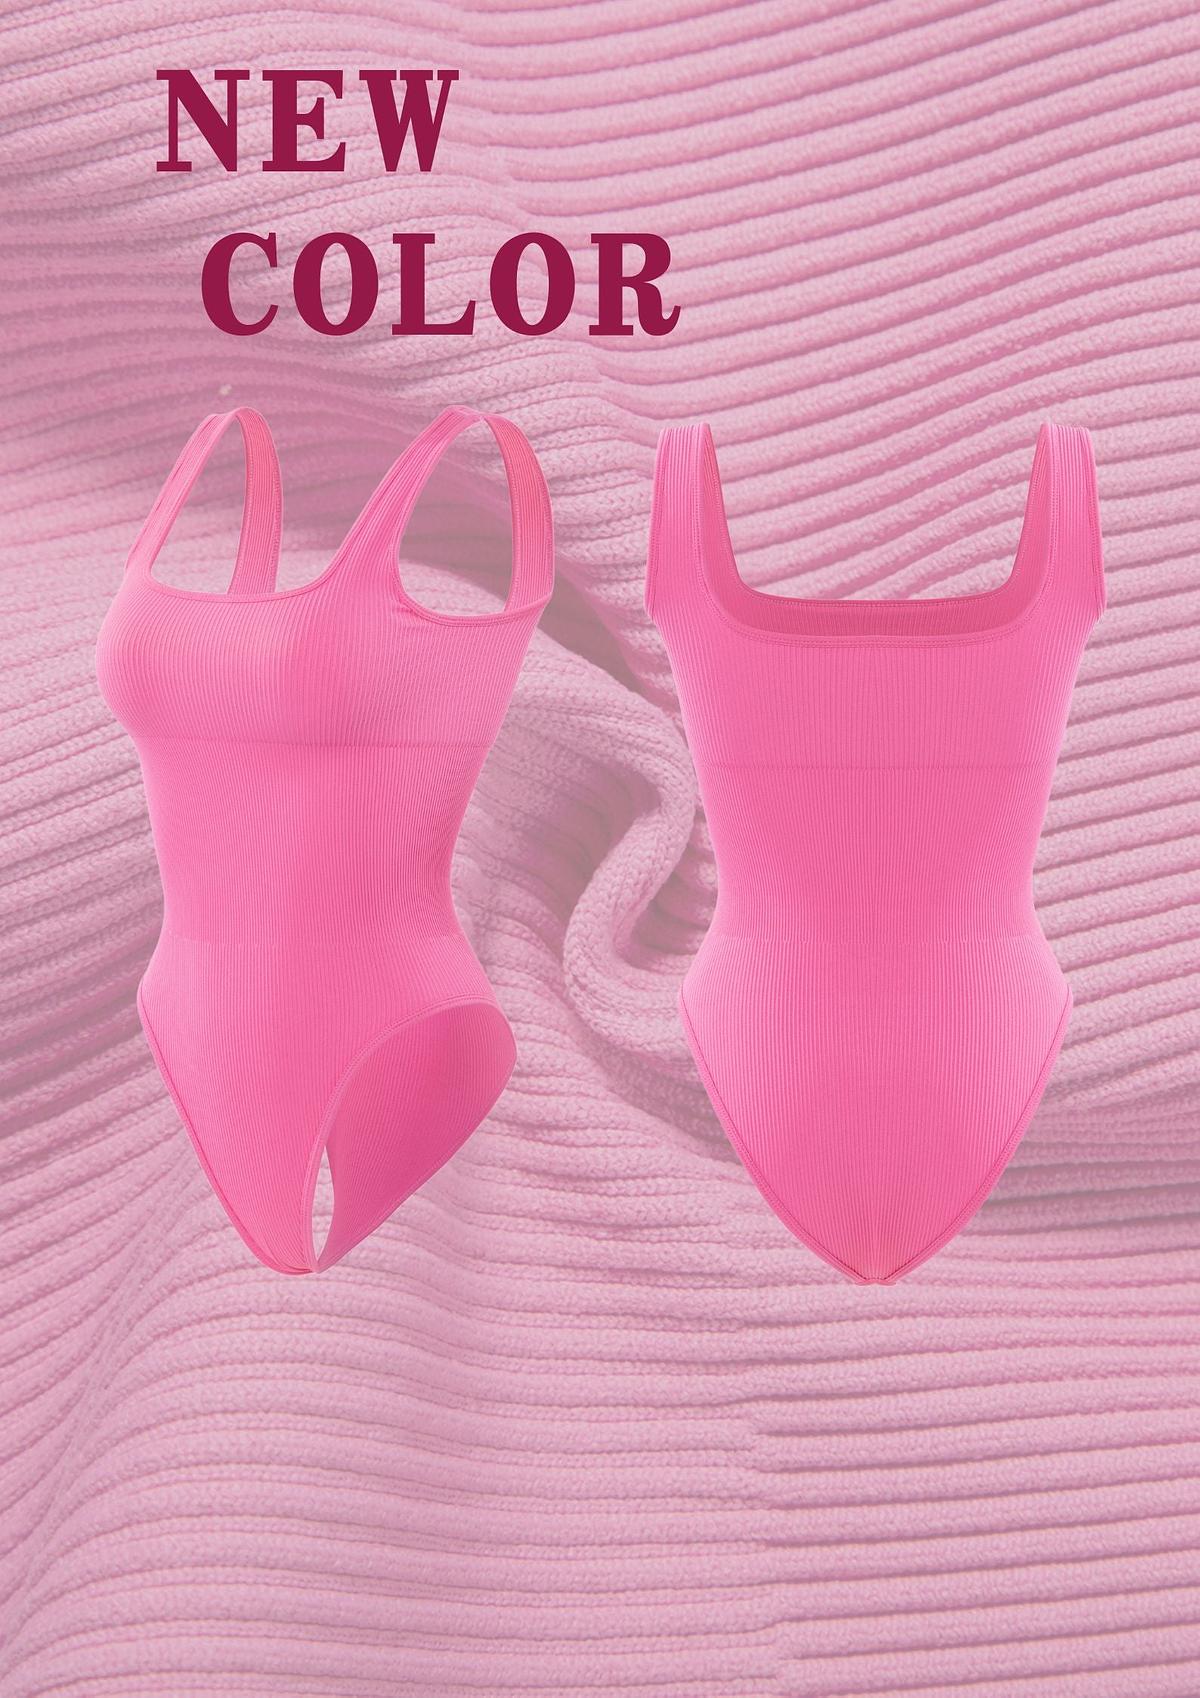 Discover Our Bodysuits for NEW Color! - Mooslover